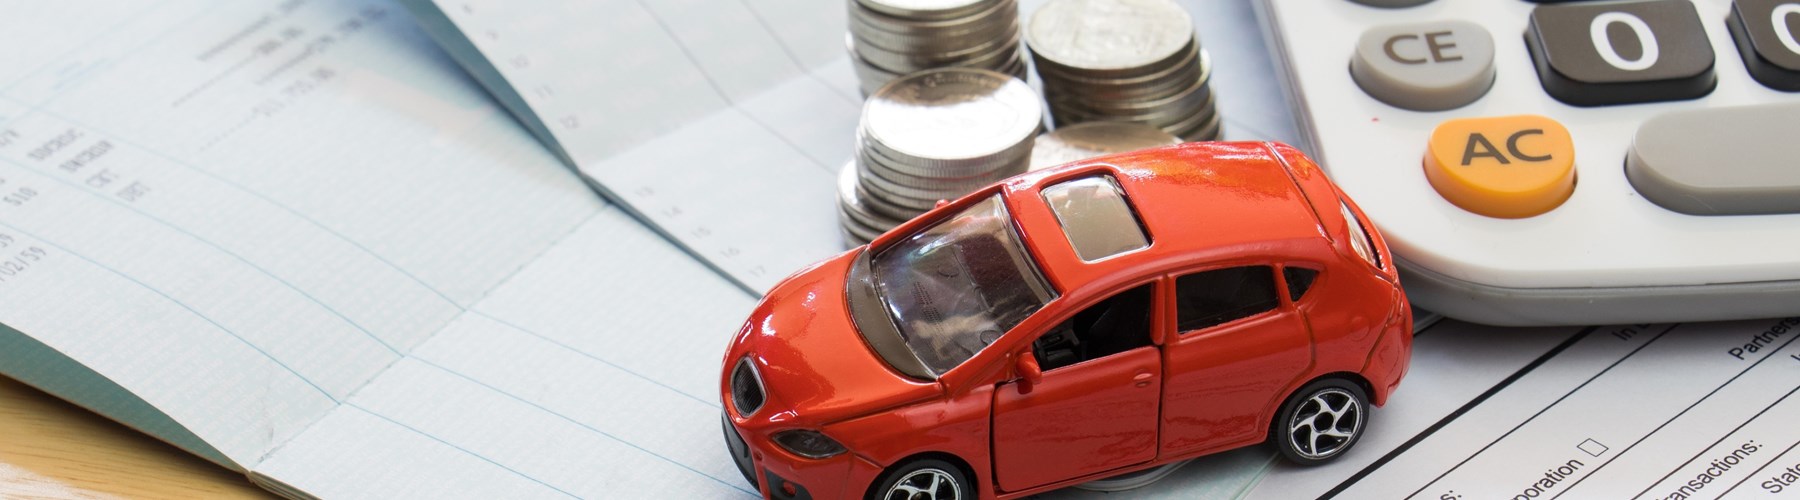 Red toy car with calculator and coins on top of documents